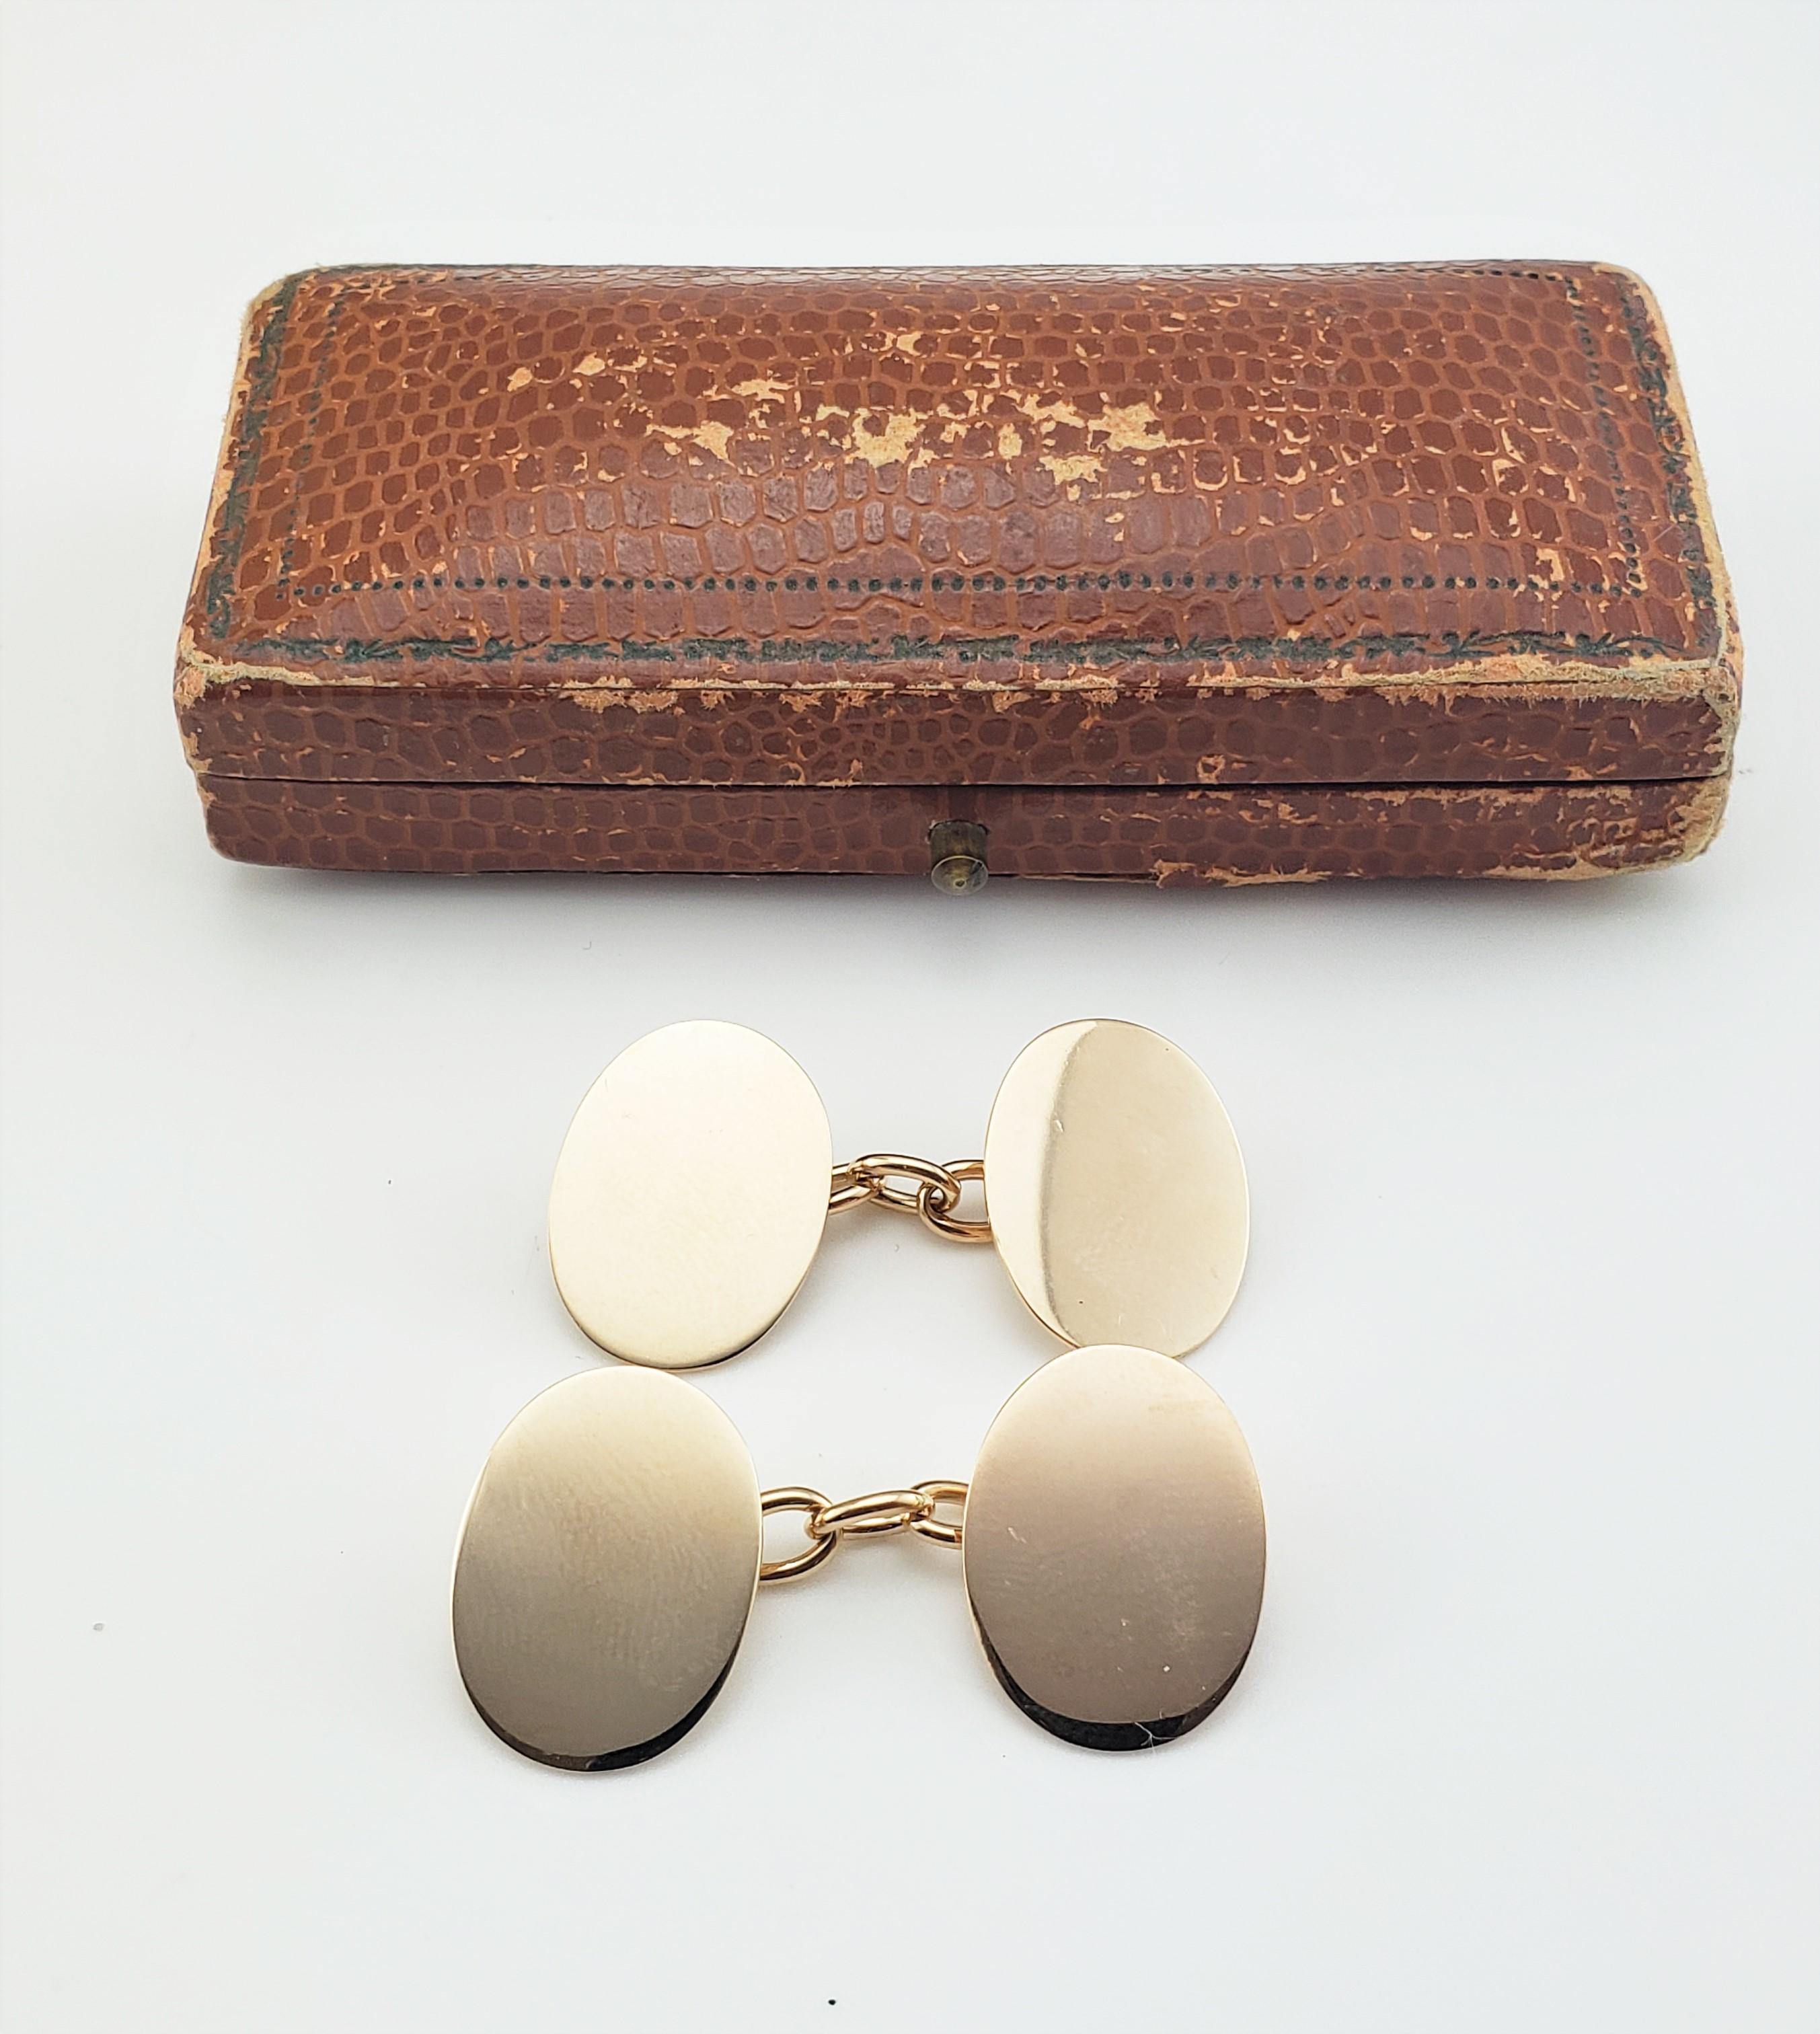 15 Karat Yellow Gold Cuff Links-

These elegant cufflinks are crafted in beautifully detailed 15K polished yellow gold.  Original case included.

Size:   19 mm  x  14  mm

Weight:  7.2 dwt. / 11.2 gr.

Stamped:  15 ct

Hallmark:  BASSE

Very good